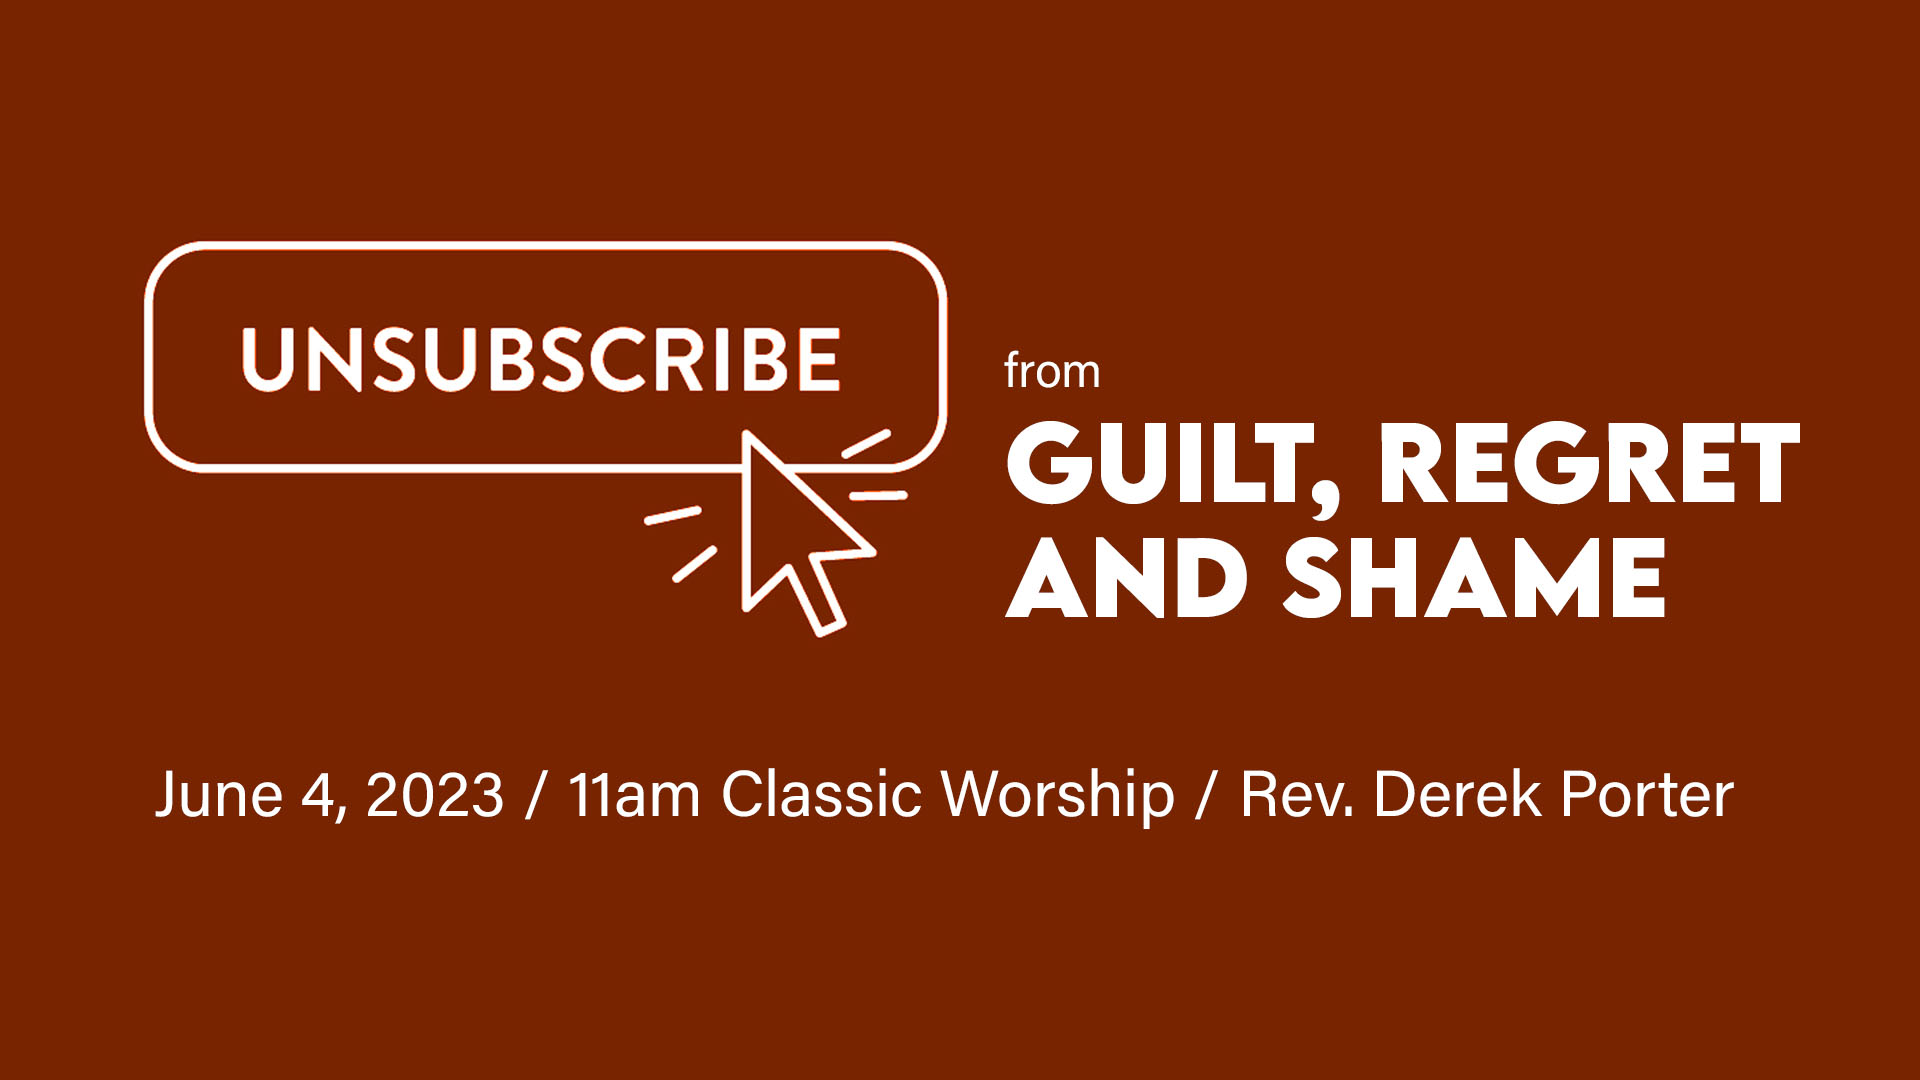 Unsubscribe from Guilt, Regret, and Shame